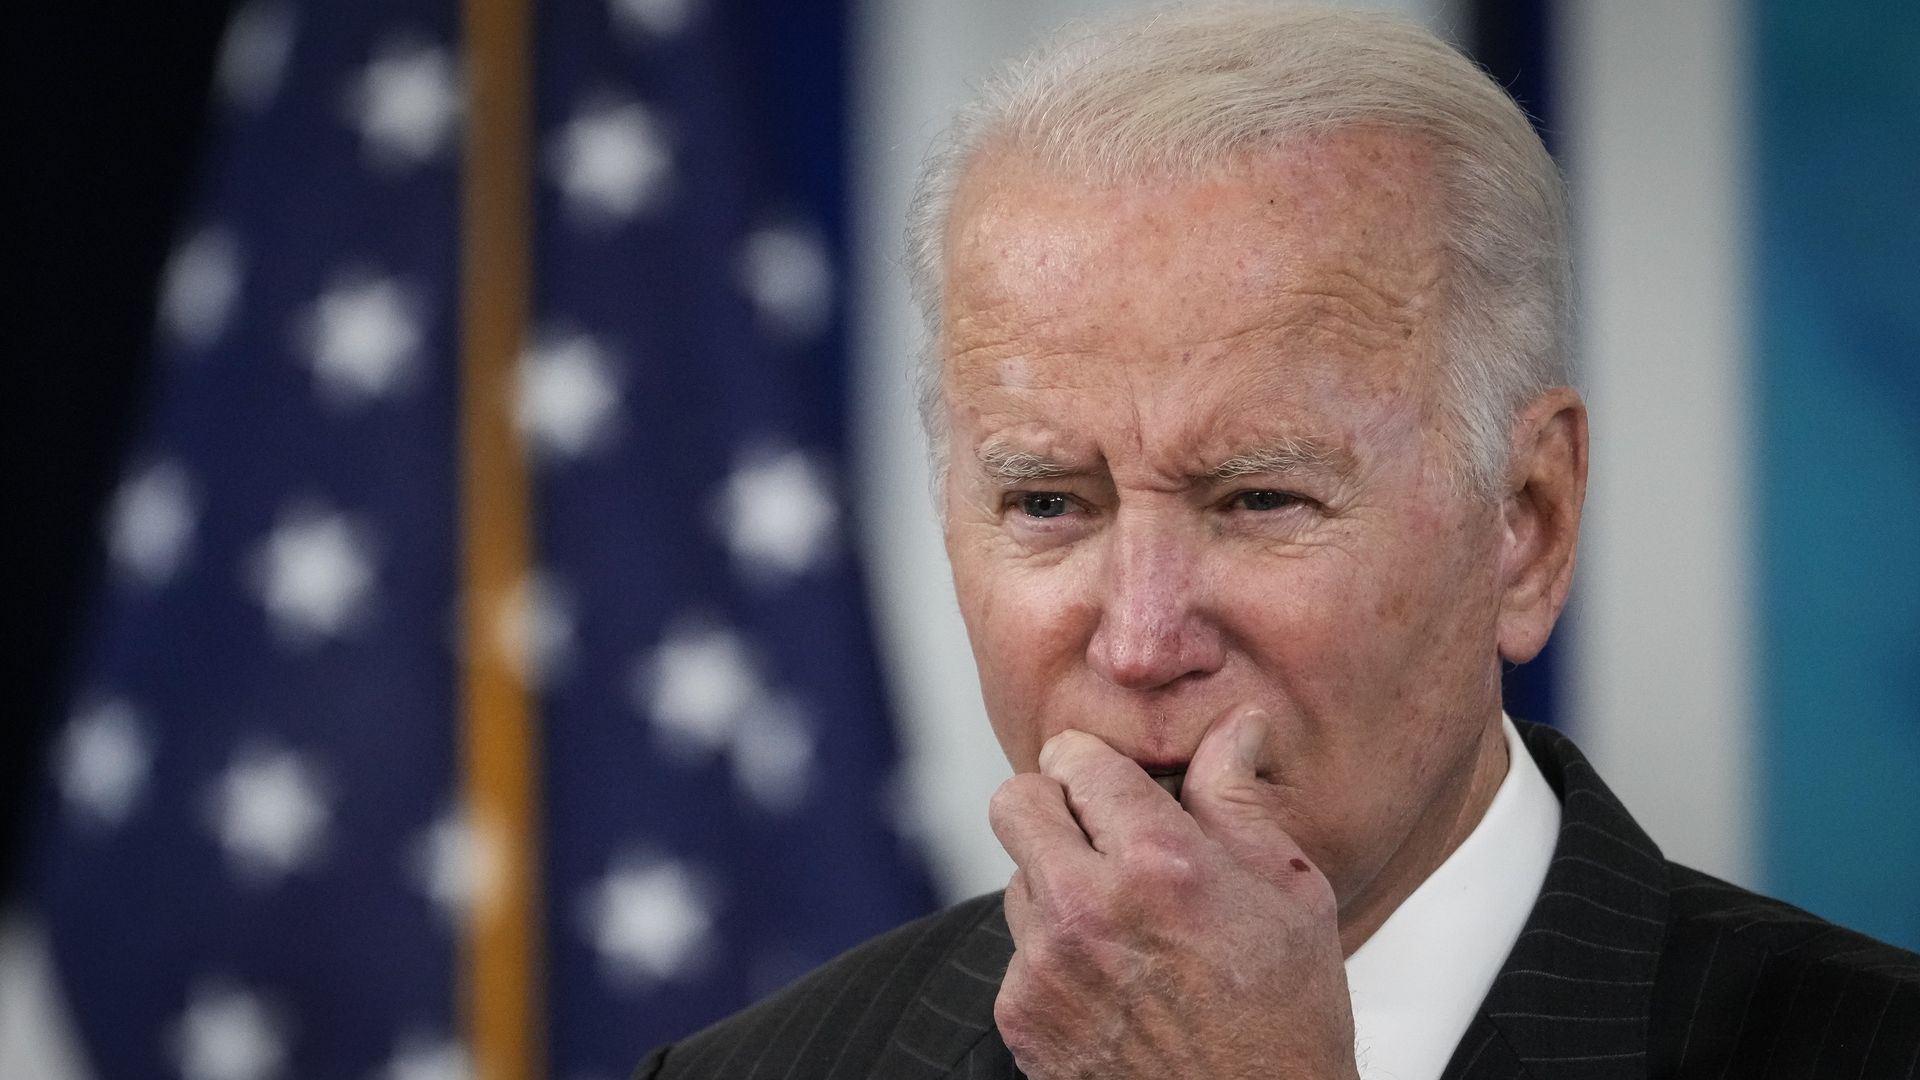 Photo of Joe Biden holding his hand to his mouth